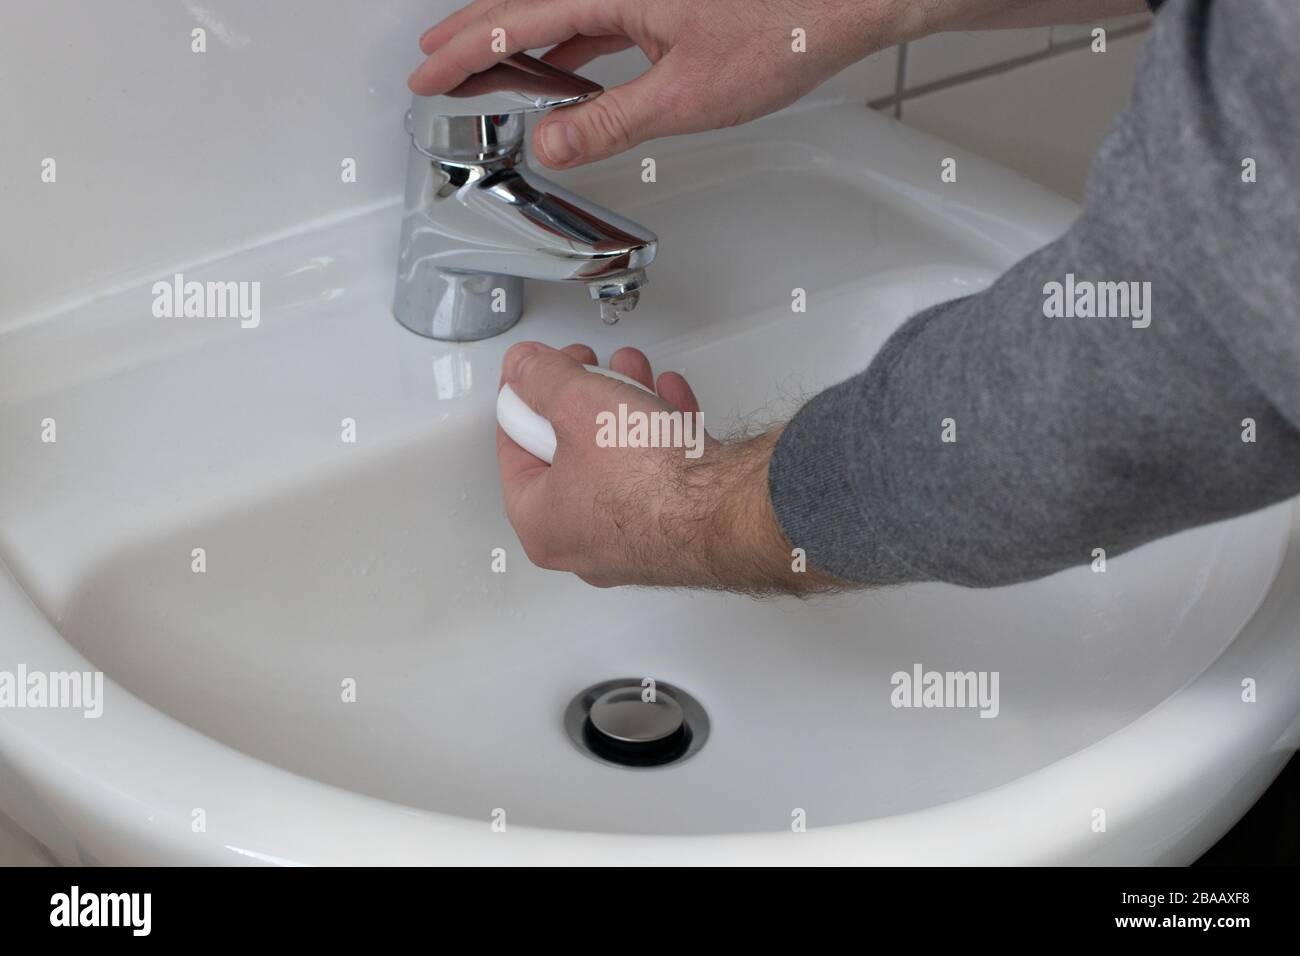 Detail of a Young male washing his Hands with Soap under running water in order to reduce infection Risk during corona Virus pandemic Stock Photo